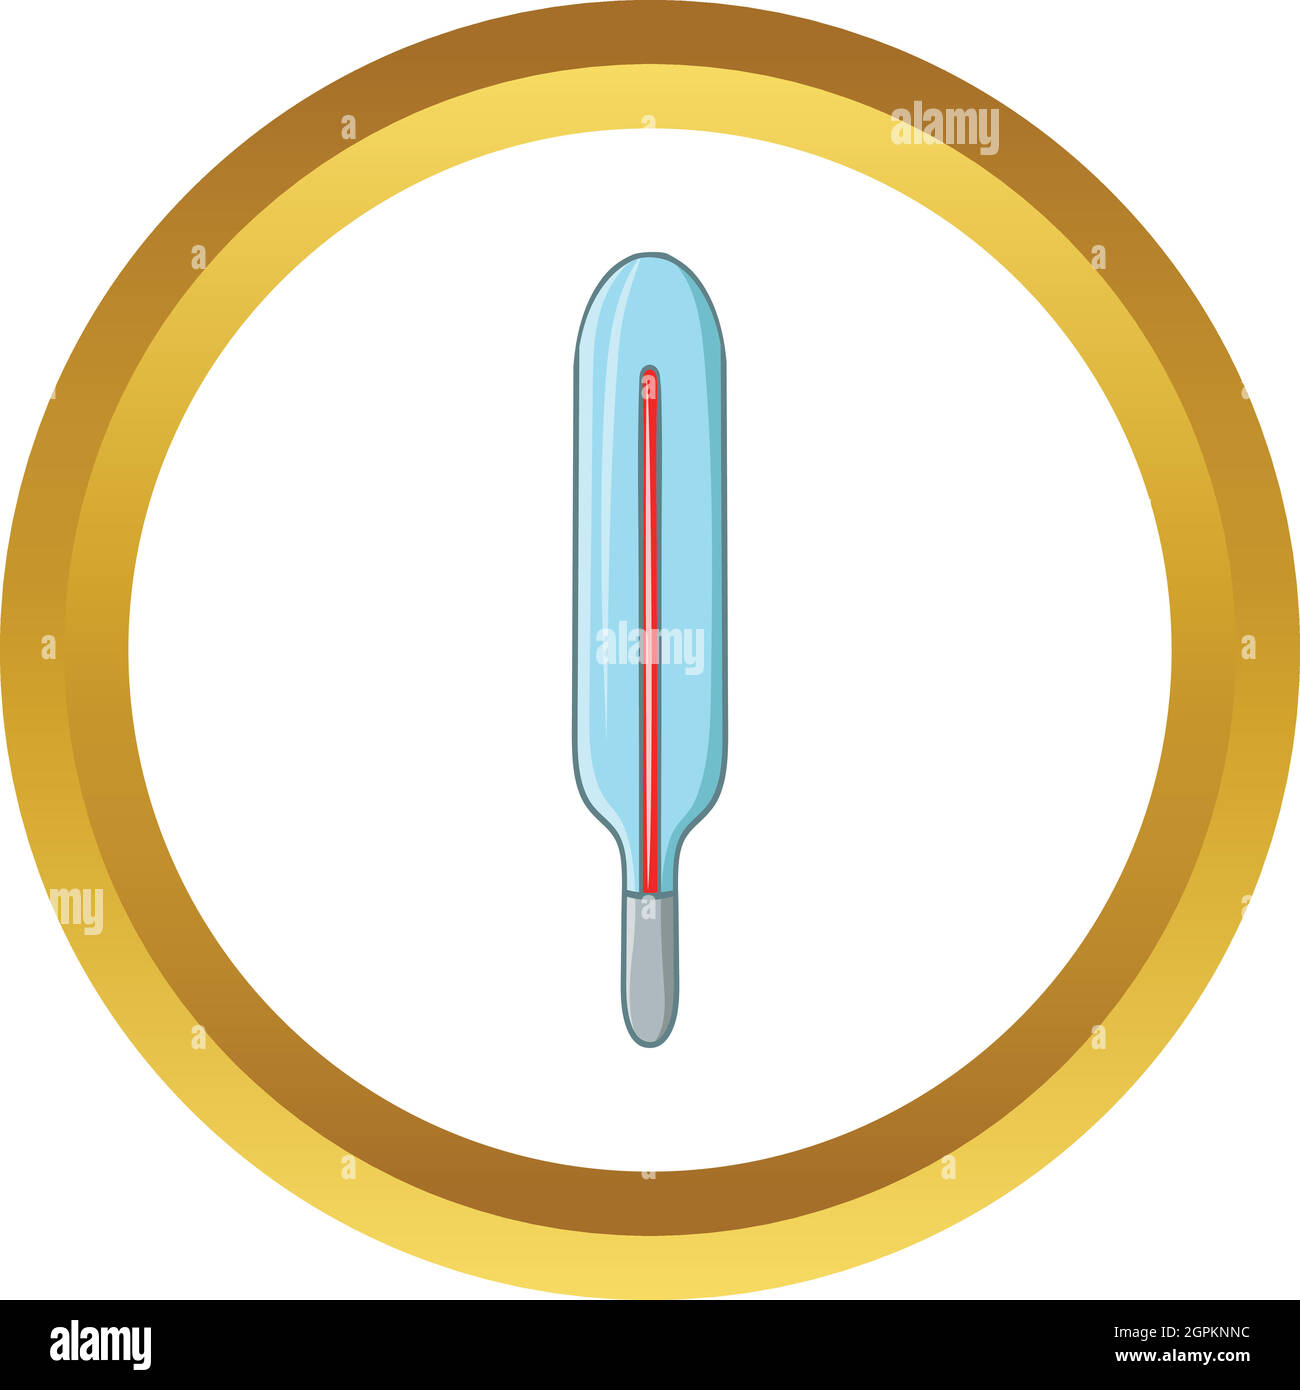 Medical mercury thermometer vector icon Stock Vector